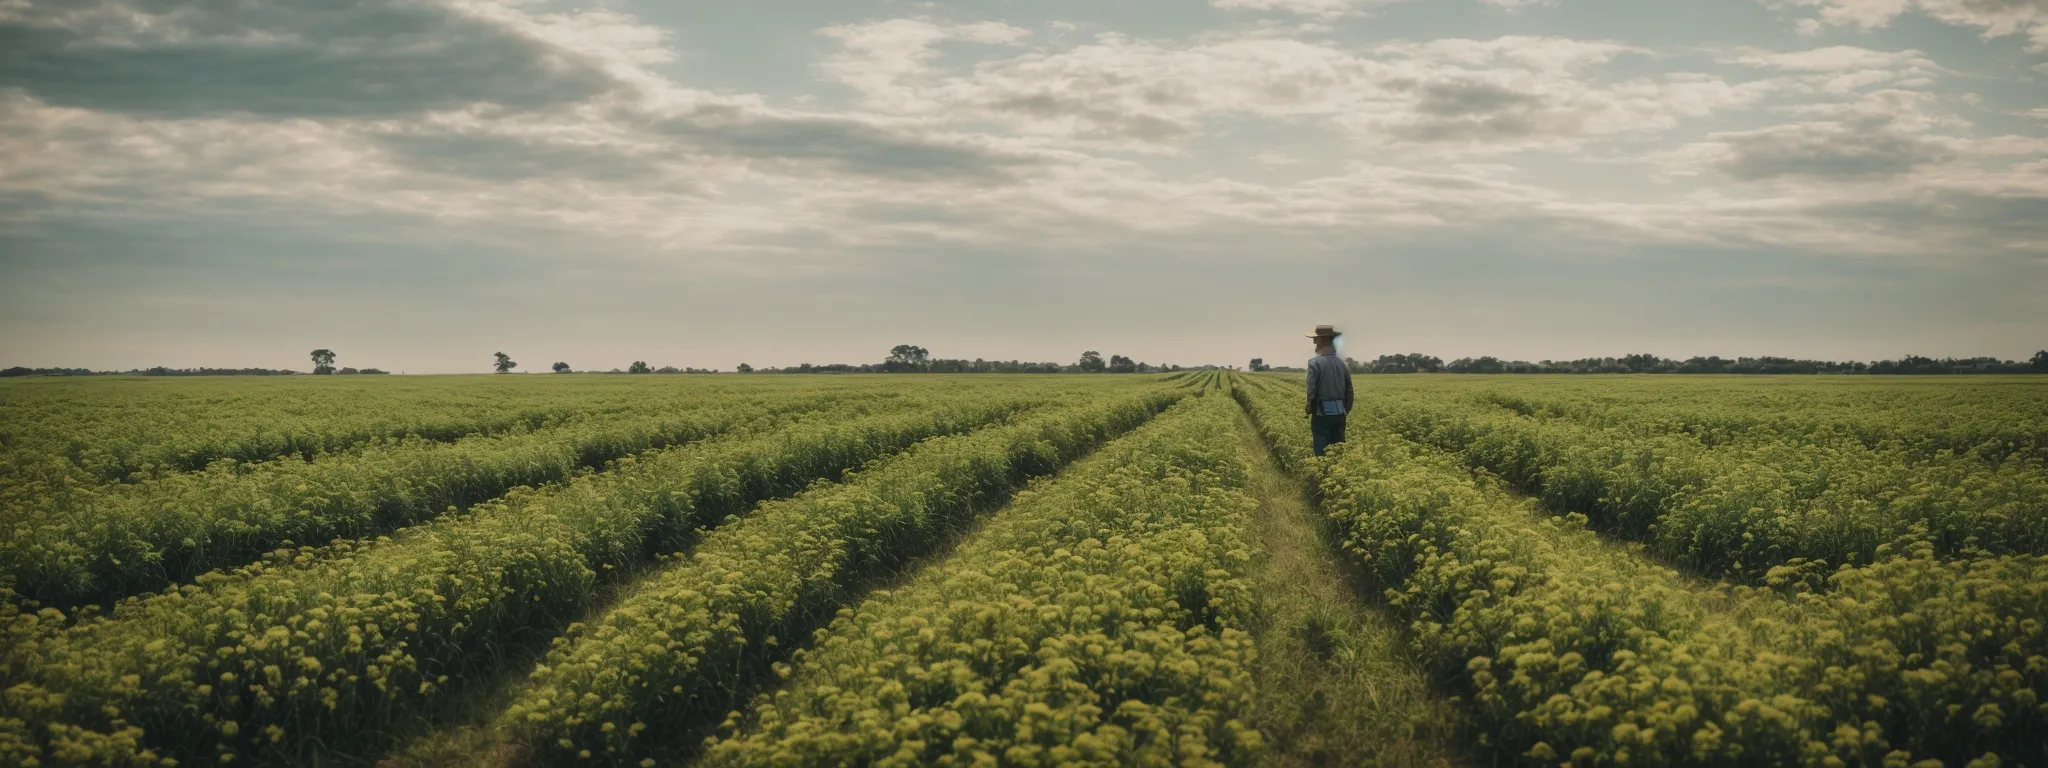 A Person Stands Before A Vast Field, Gazing At Rows Of Flourishing Plants Under A Broad, Sunny Sky.